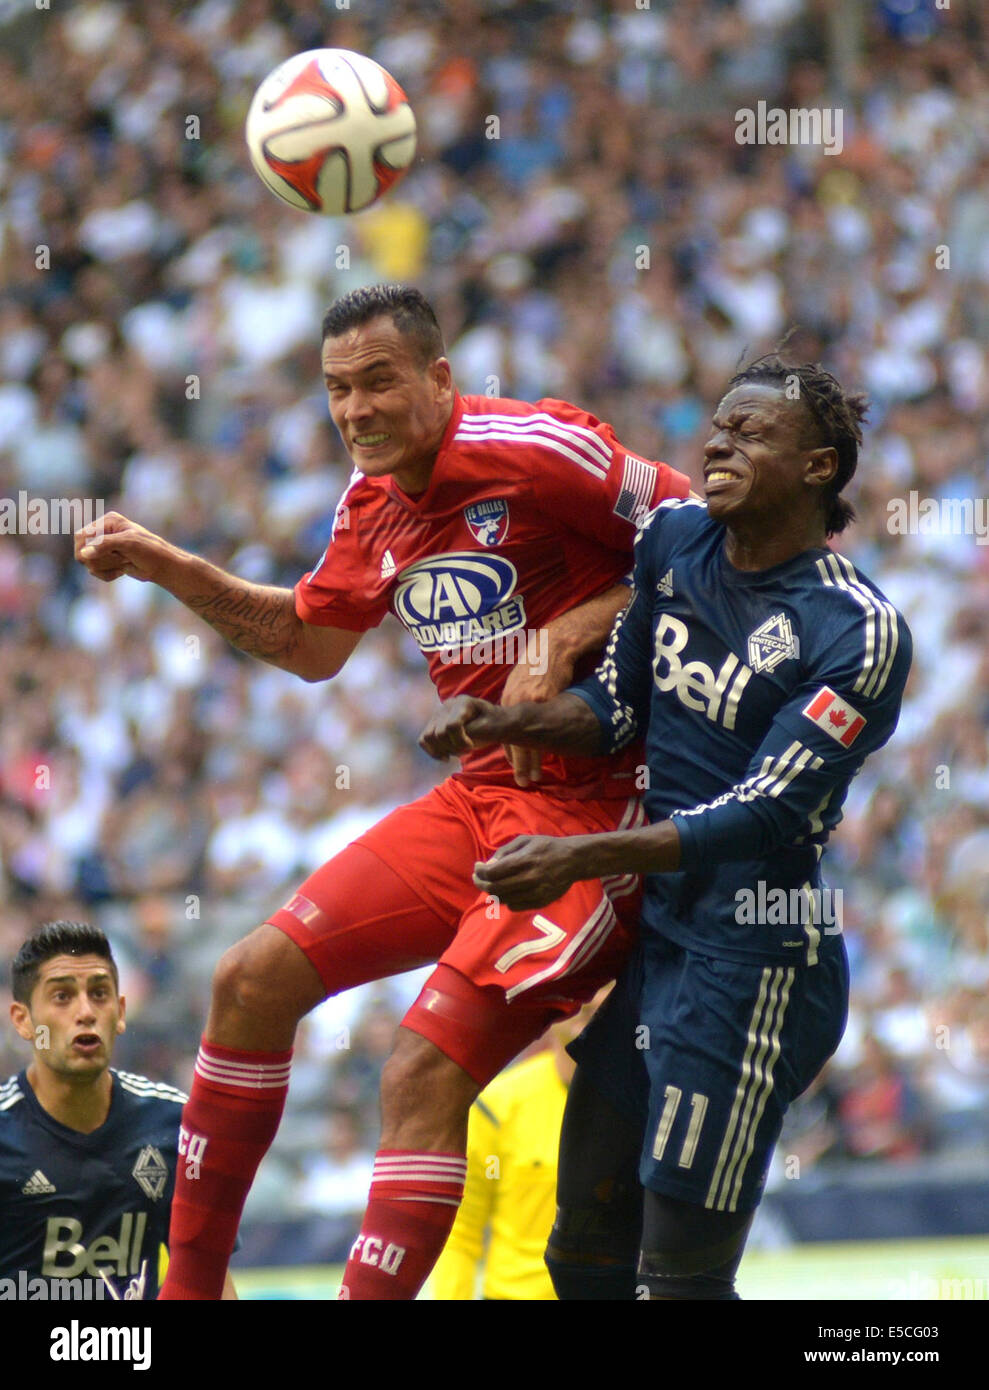 Vancouver, Canada. 27th July, 2014. FC Dallas' Blas Perez (L) vies with Vancouver Whitecaps' Darren Mattocks during their MLS soccer game at BC Place in Vancouver, Canada, on July 27, 2014. Vancouver Whitecaps tied FC Dallas 2-2. Credit:  Sergei Bachlakov/Xinhua/Alamy Live News Stock Photo